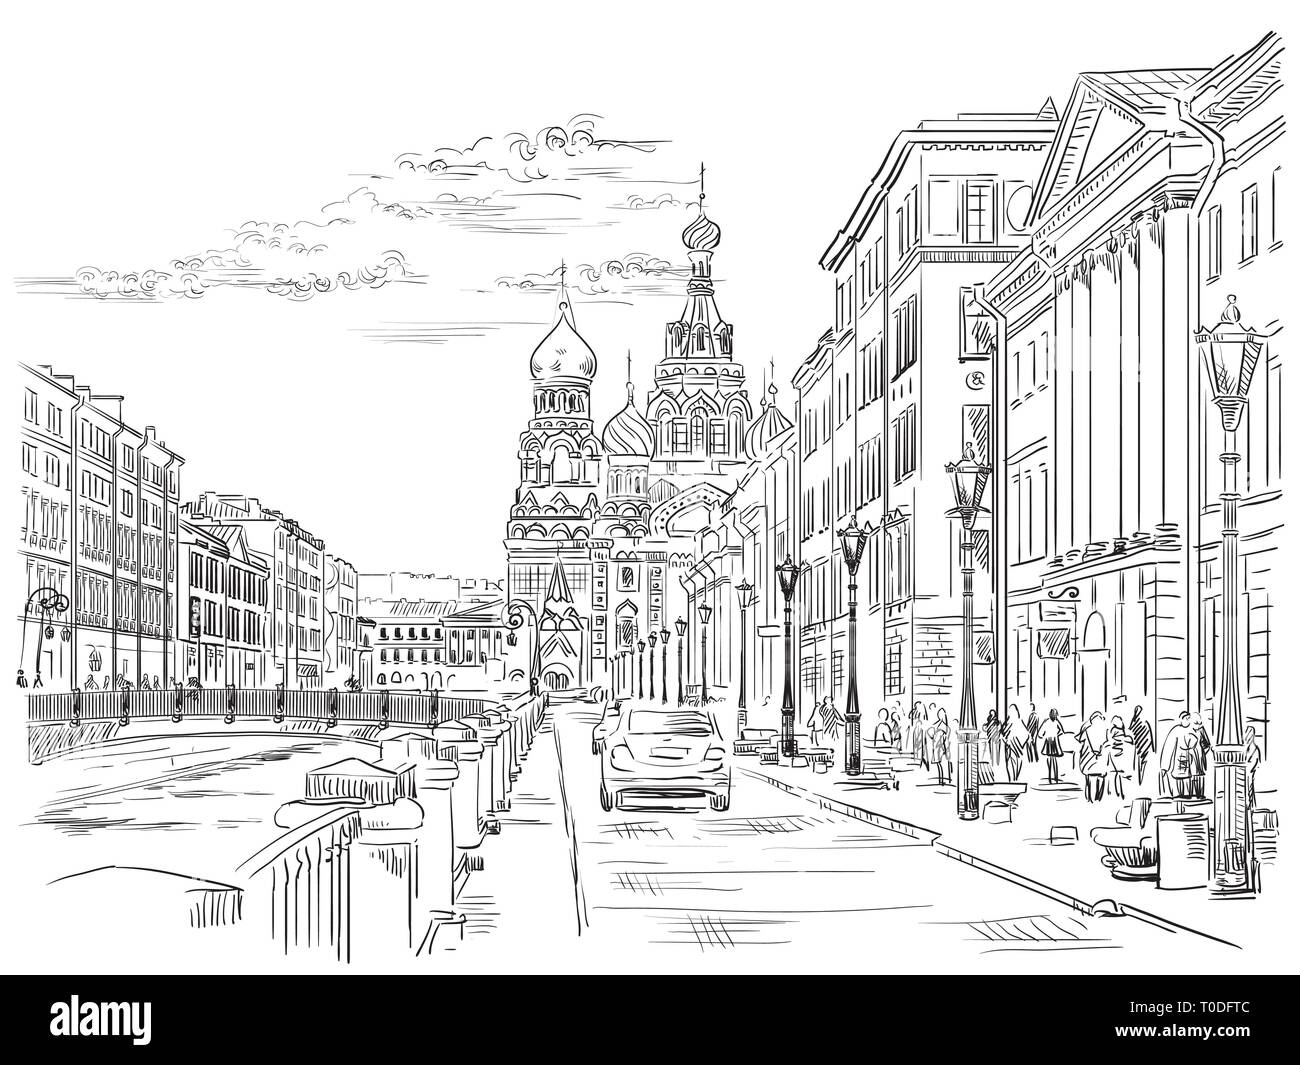 Cityscape of Church of the Savior on Blood in Saint Petersburg, Russia and embankment of river. Isolated vector hand drawing illustration in black col Stock Vector